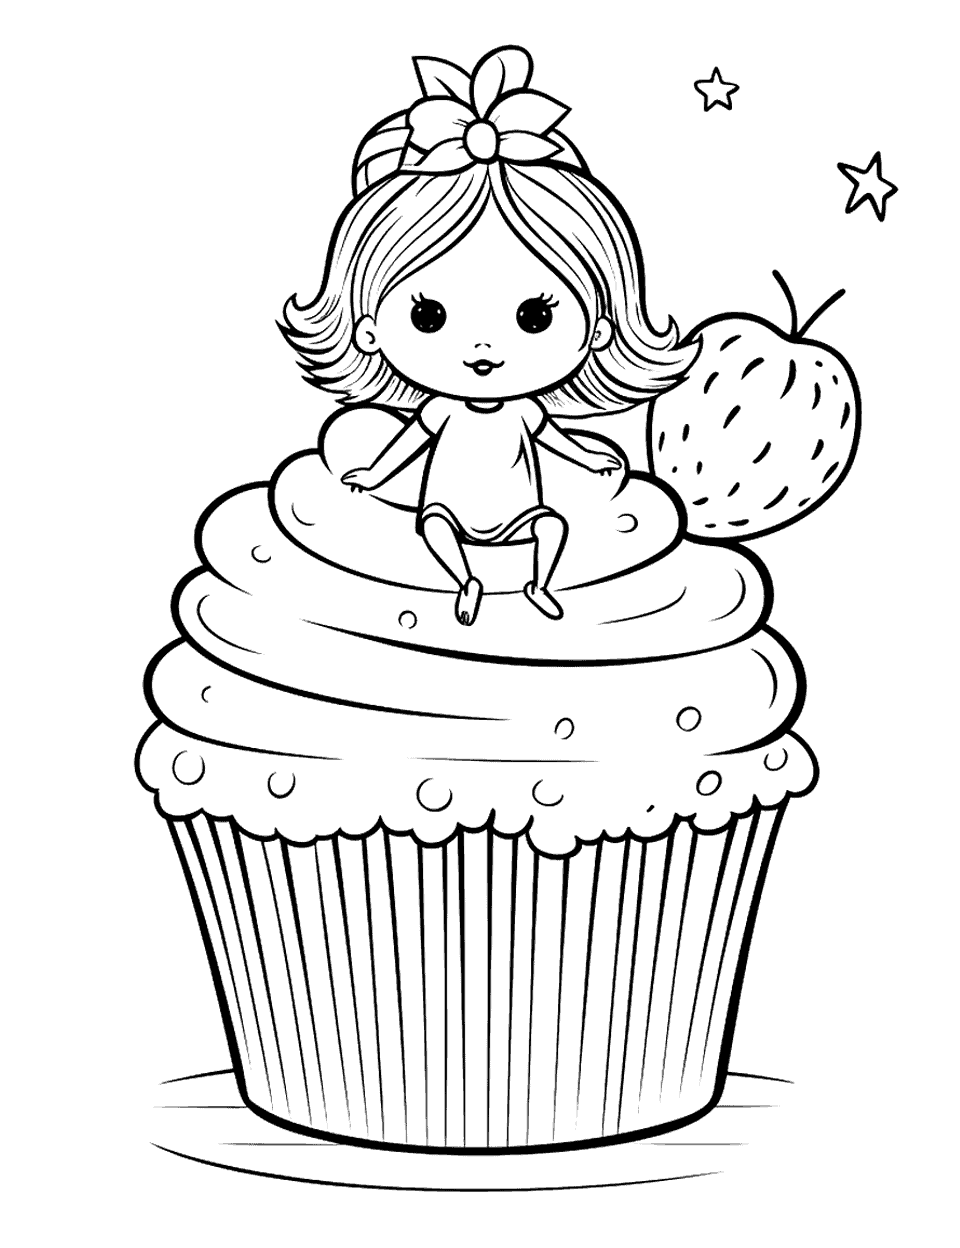 Cupcake and a Fairy Coloring Page - A cupcake with a tiny fairy sitting on top of it.